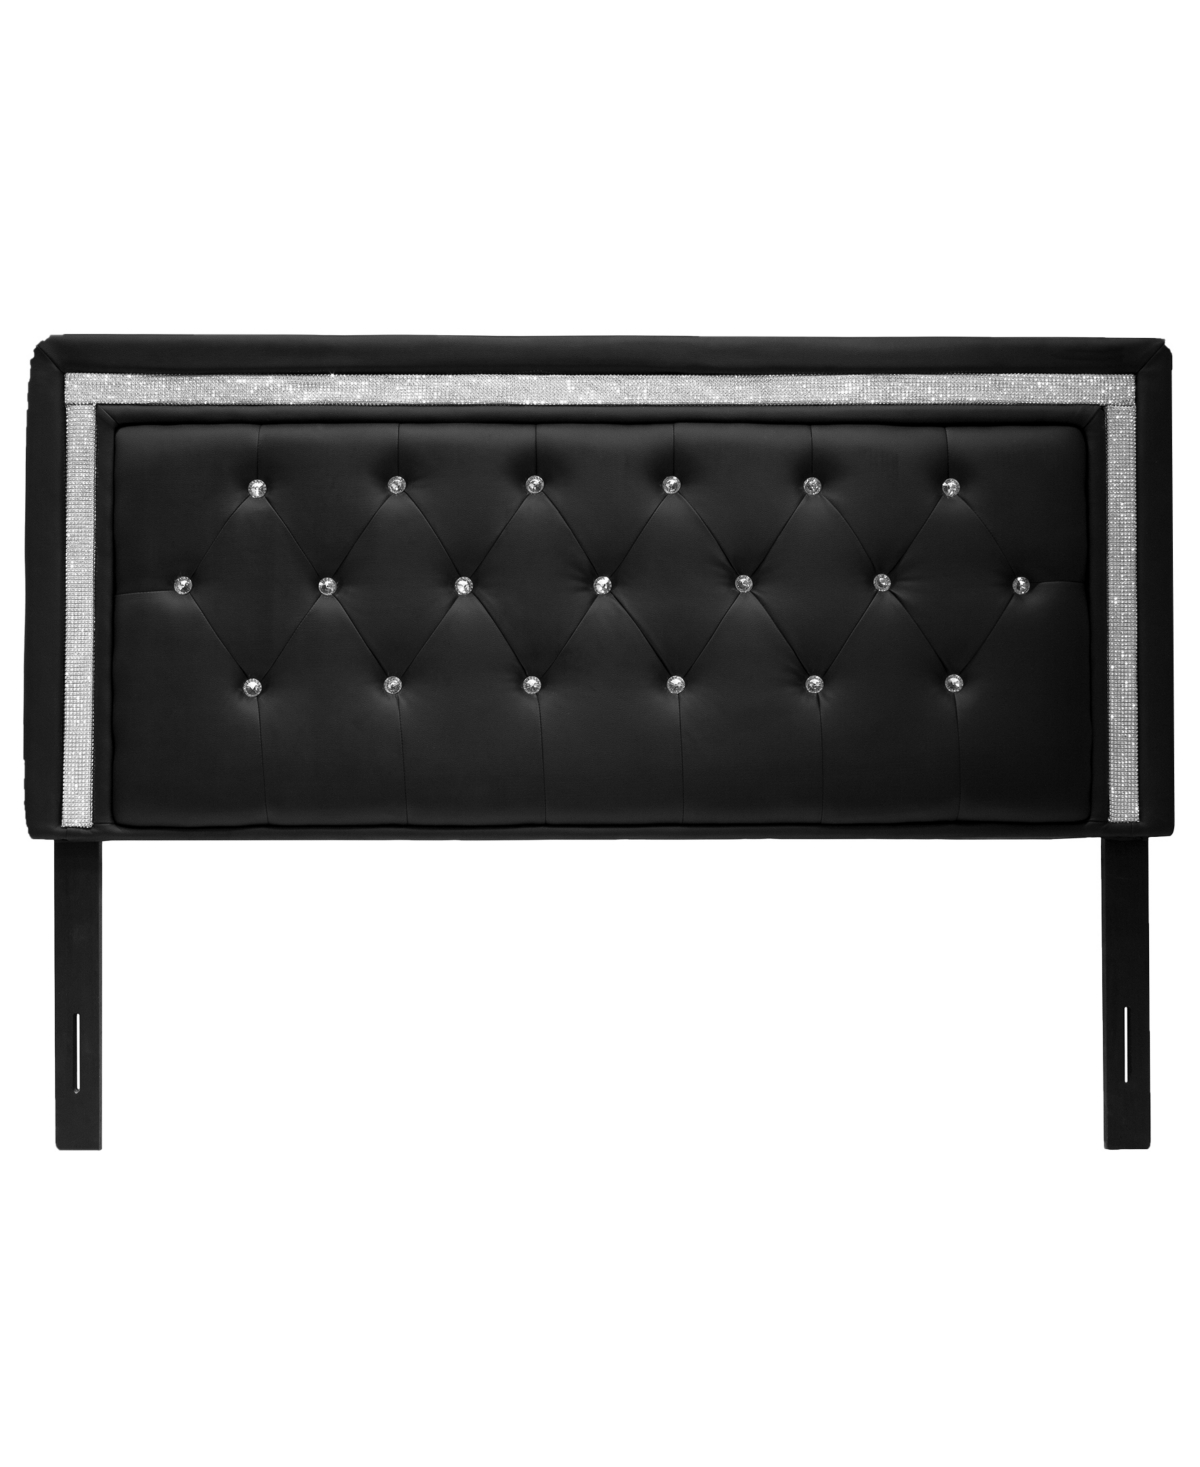 12857228 Maria Faux Leather Upholstered Headboard Tufted Cr sku 12857228